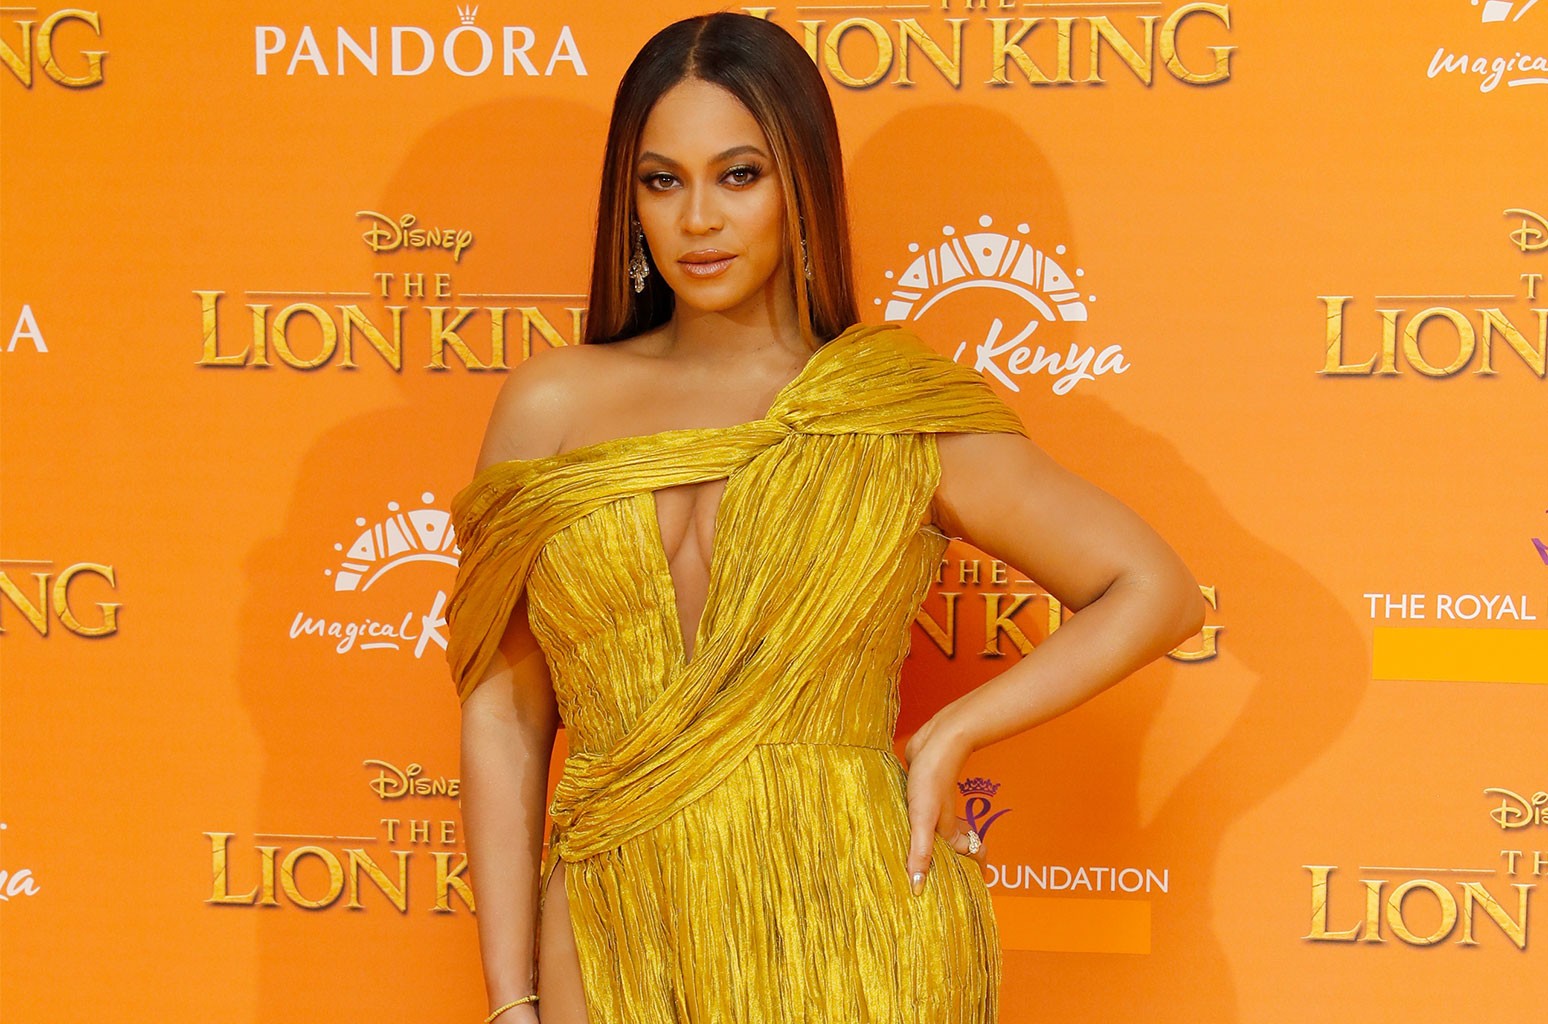 Beyonce’s Storage Unit Was Reportedly Targeted For $1M in Stolen Goods